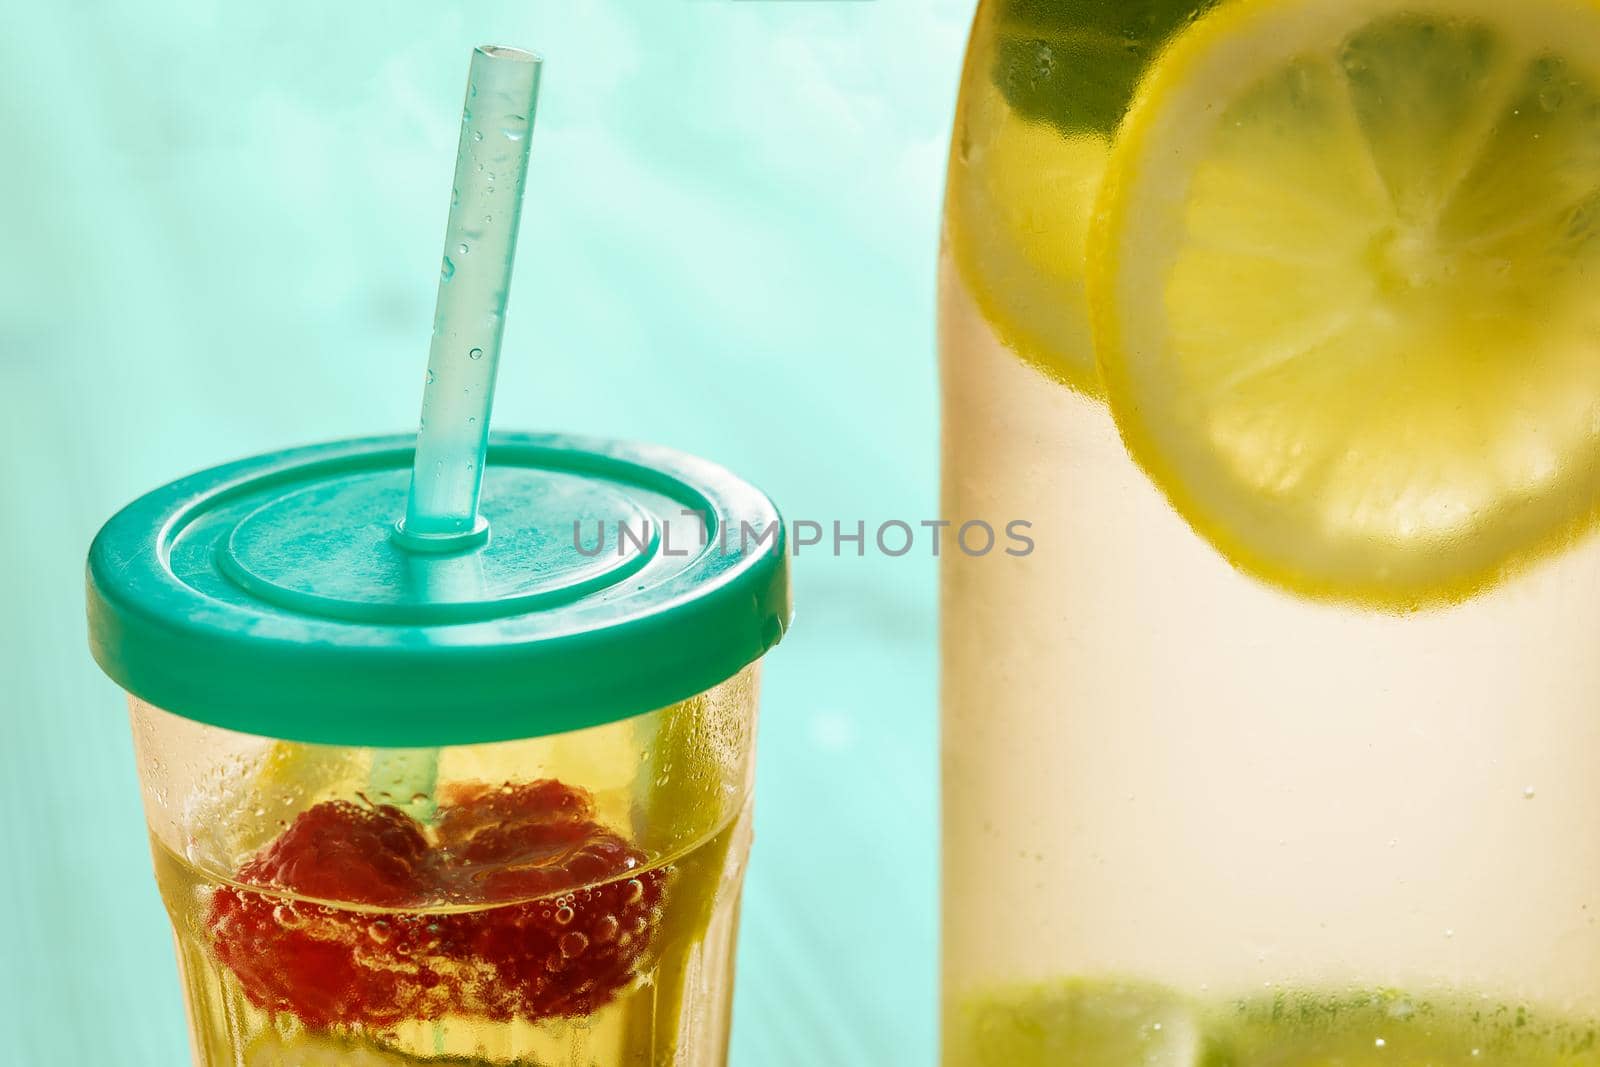 glass with lid and cane and a bottle, with cold water and slices of lemon, lime, berries and mint, are illuminated by sunlight on a wooden green table with some pieces of citrus